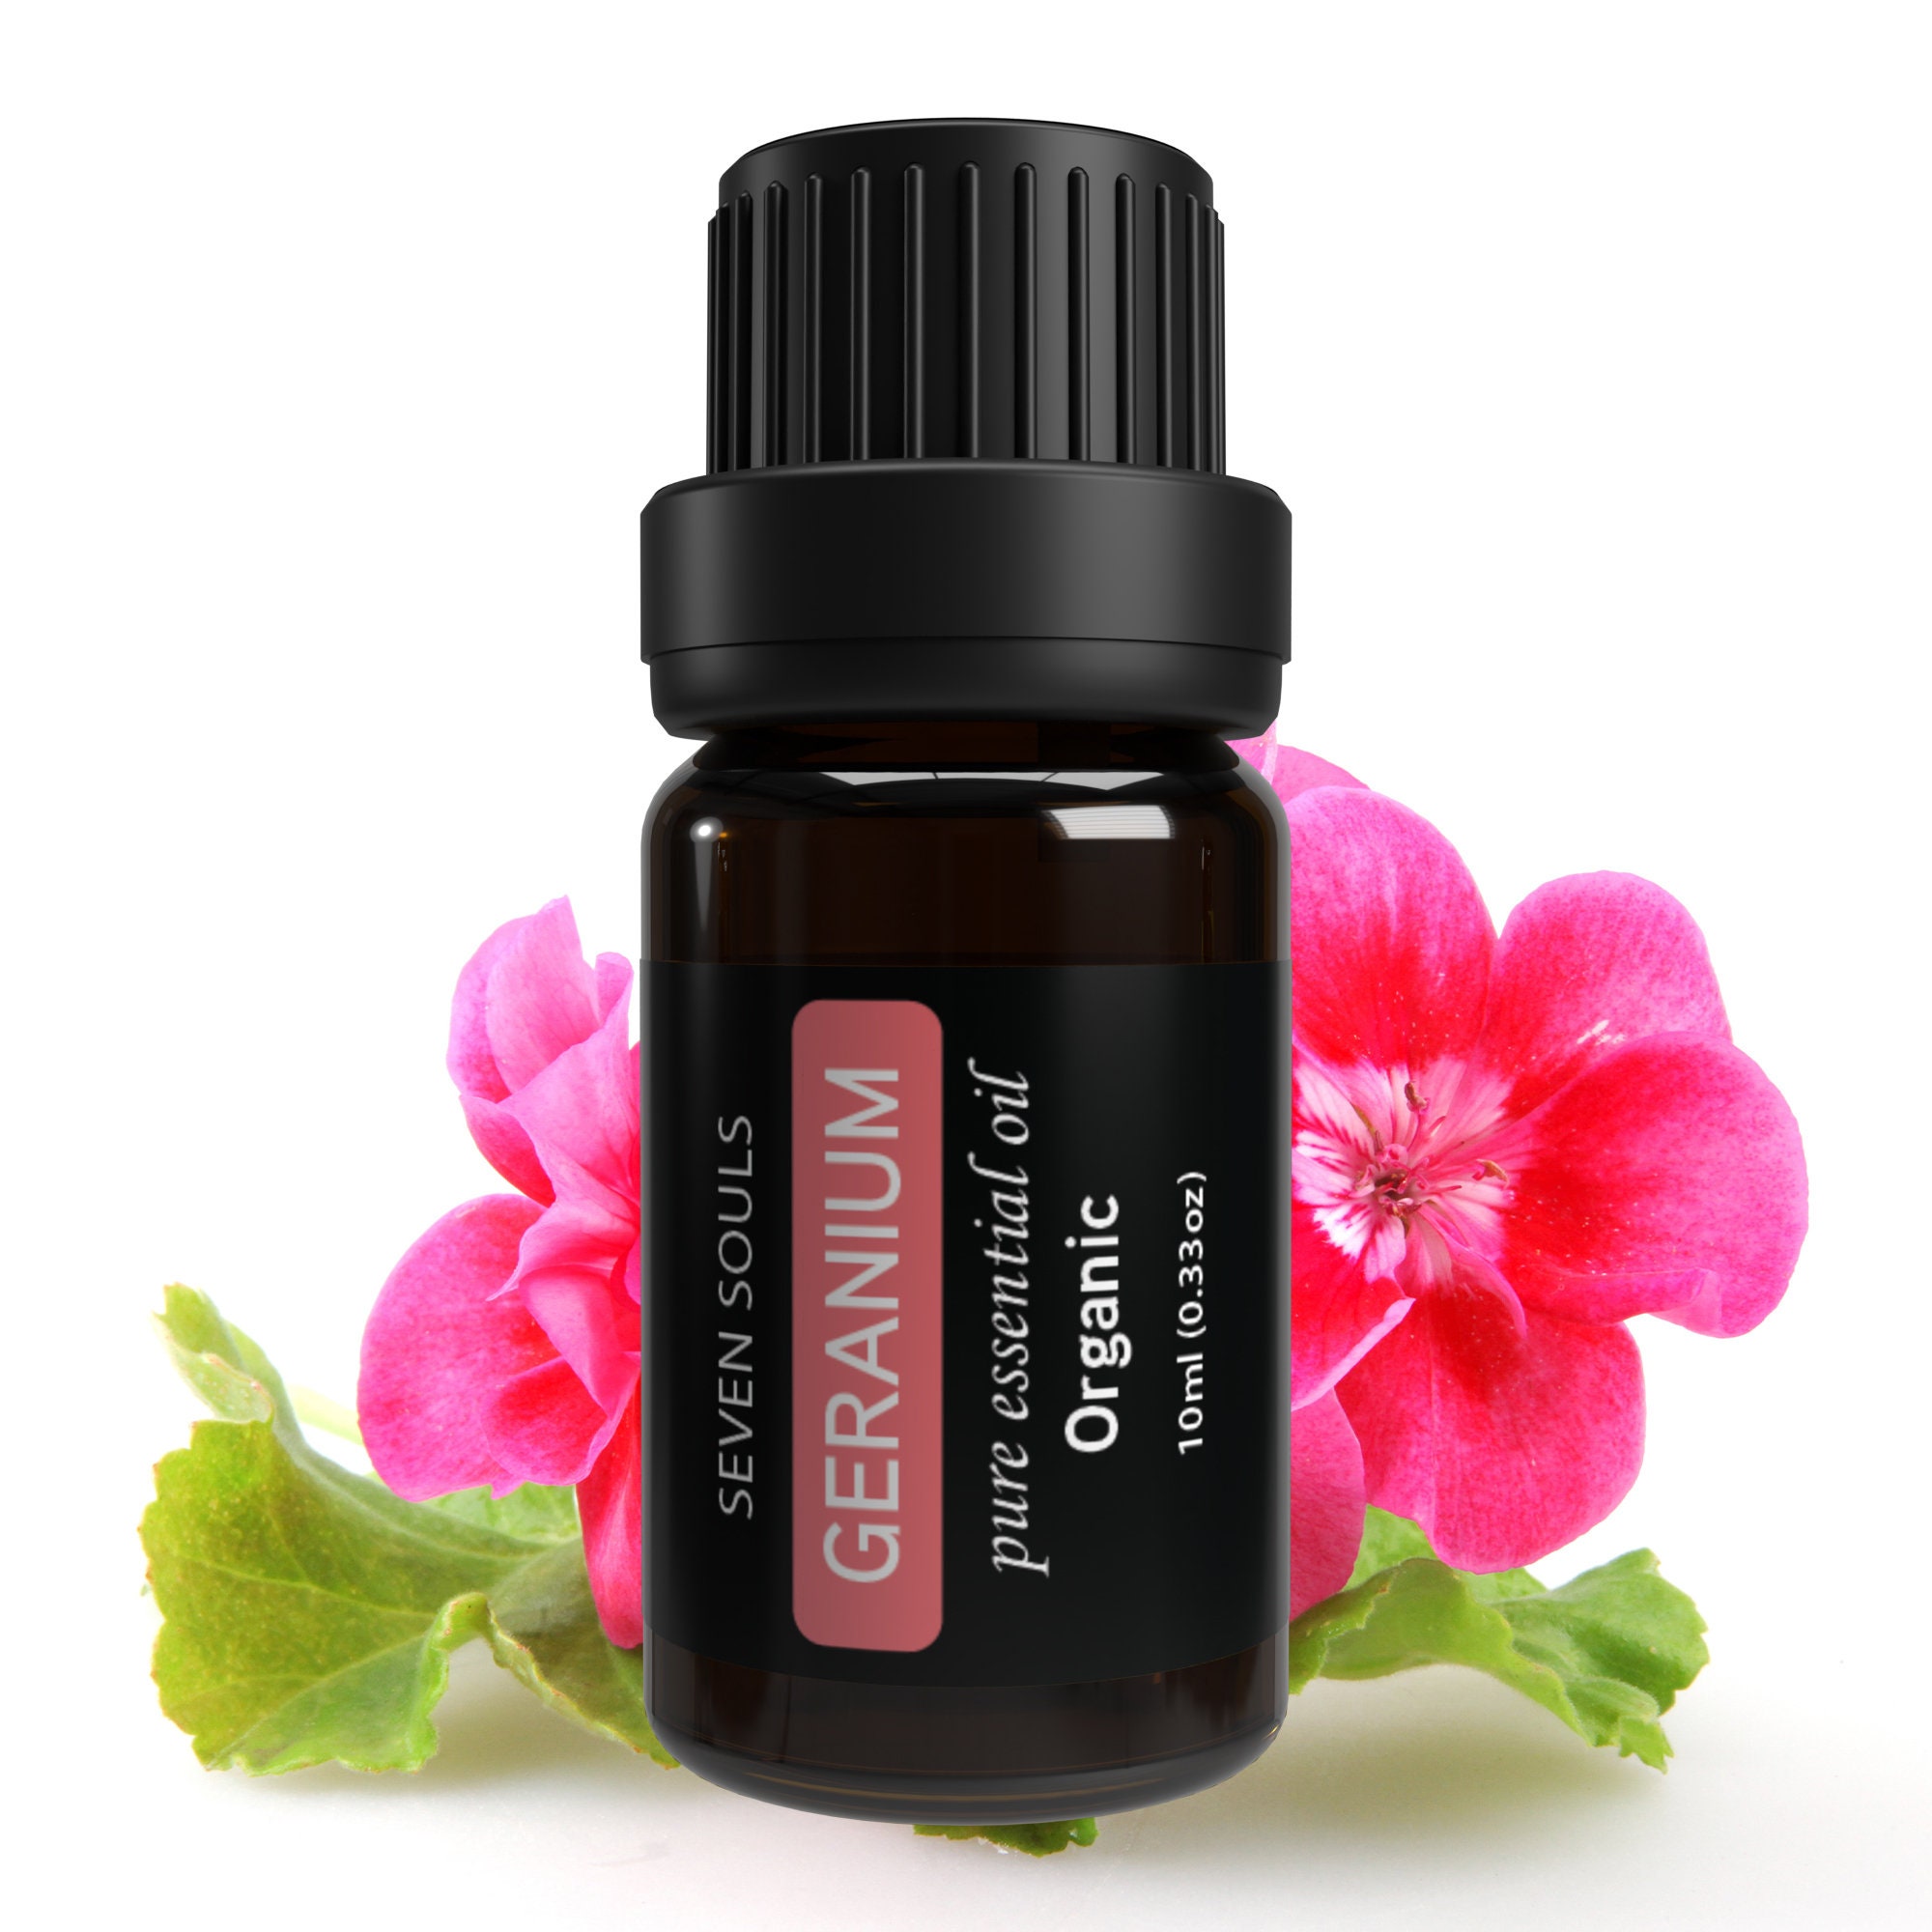 Plant Therapy Geranium Egyptian Organic Essential Oil | 100% Pure